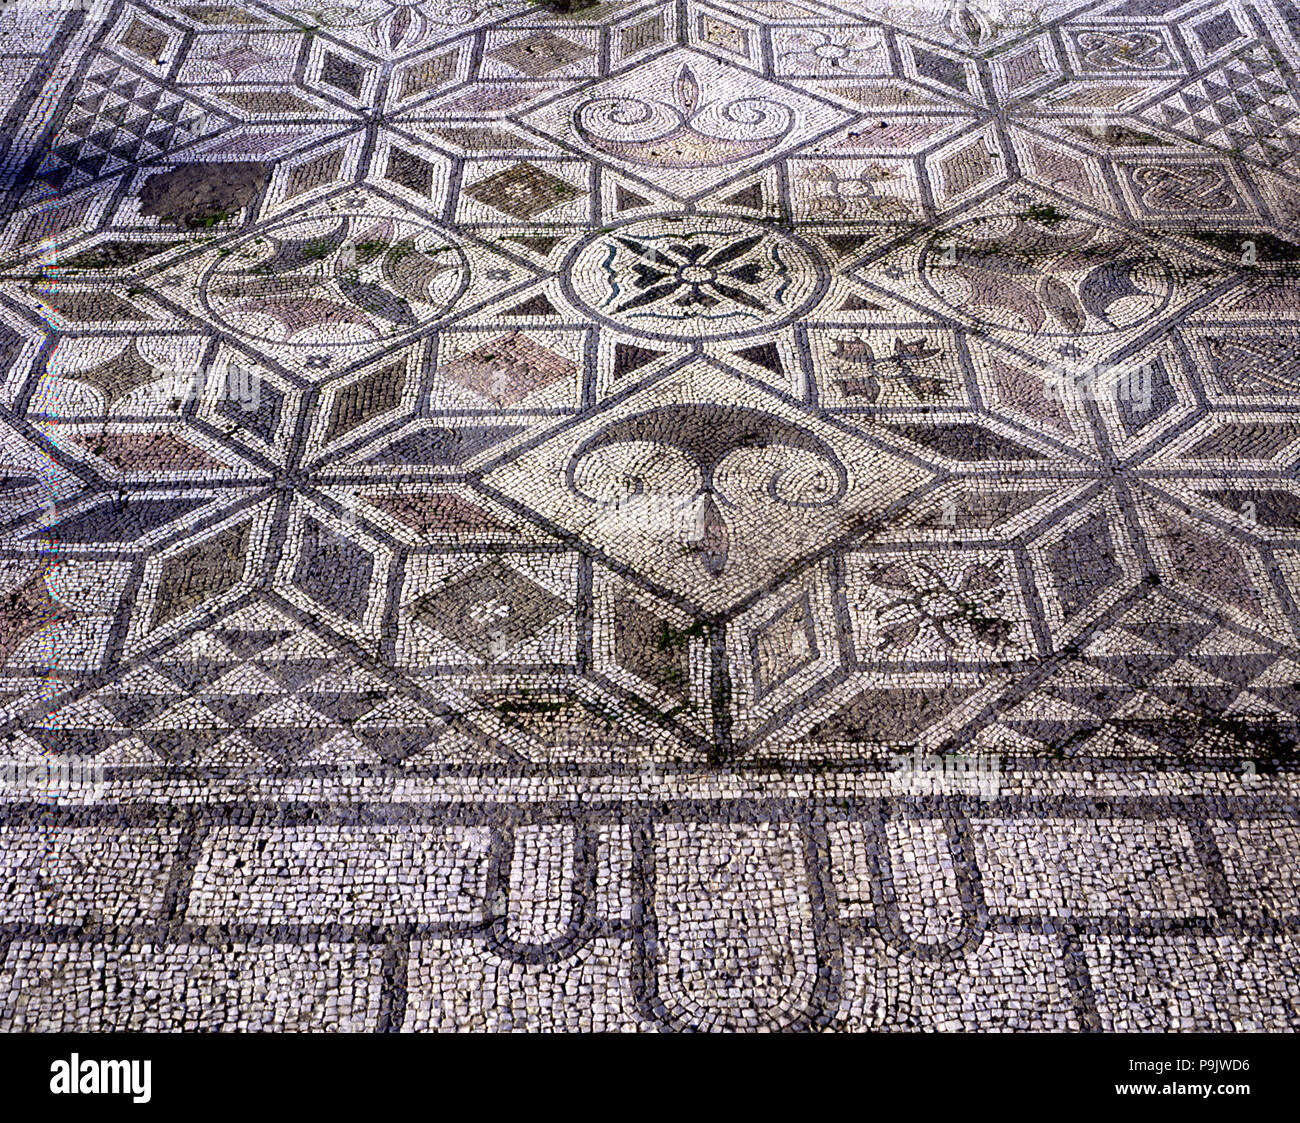 Mosaic in Birds house, in the Roman ruins of Italica founded in 206.C. by Scipio. Stock Photo